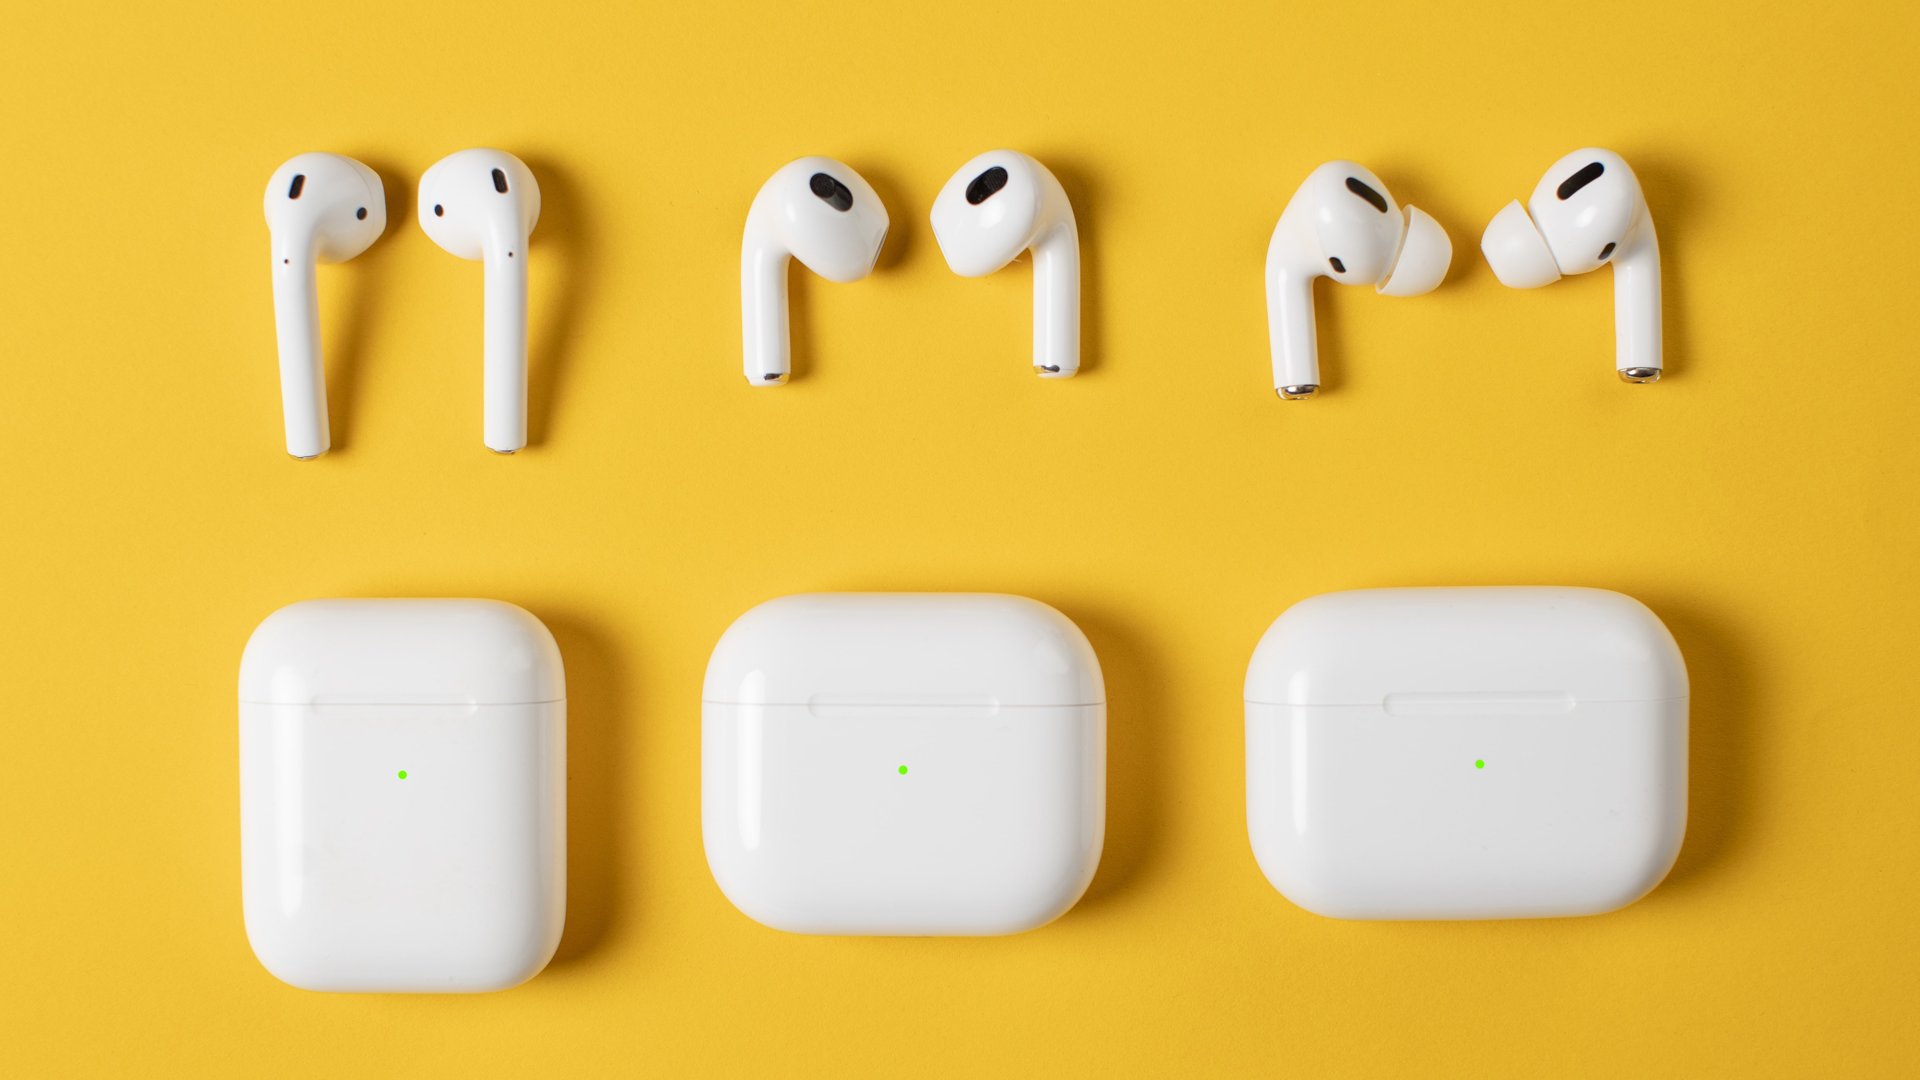 Side-by-side comparison of AirPods (2019), AirPods 3 and AirPods Pro